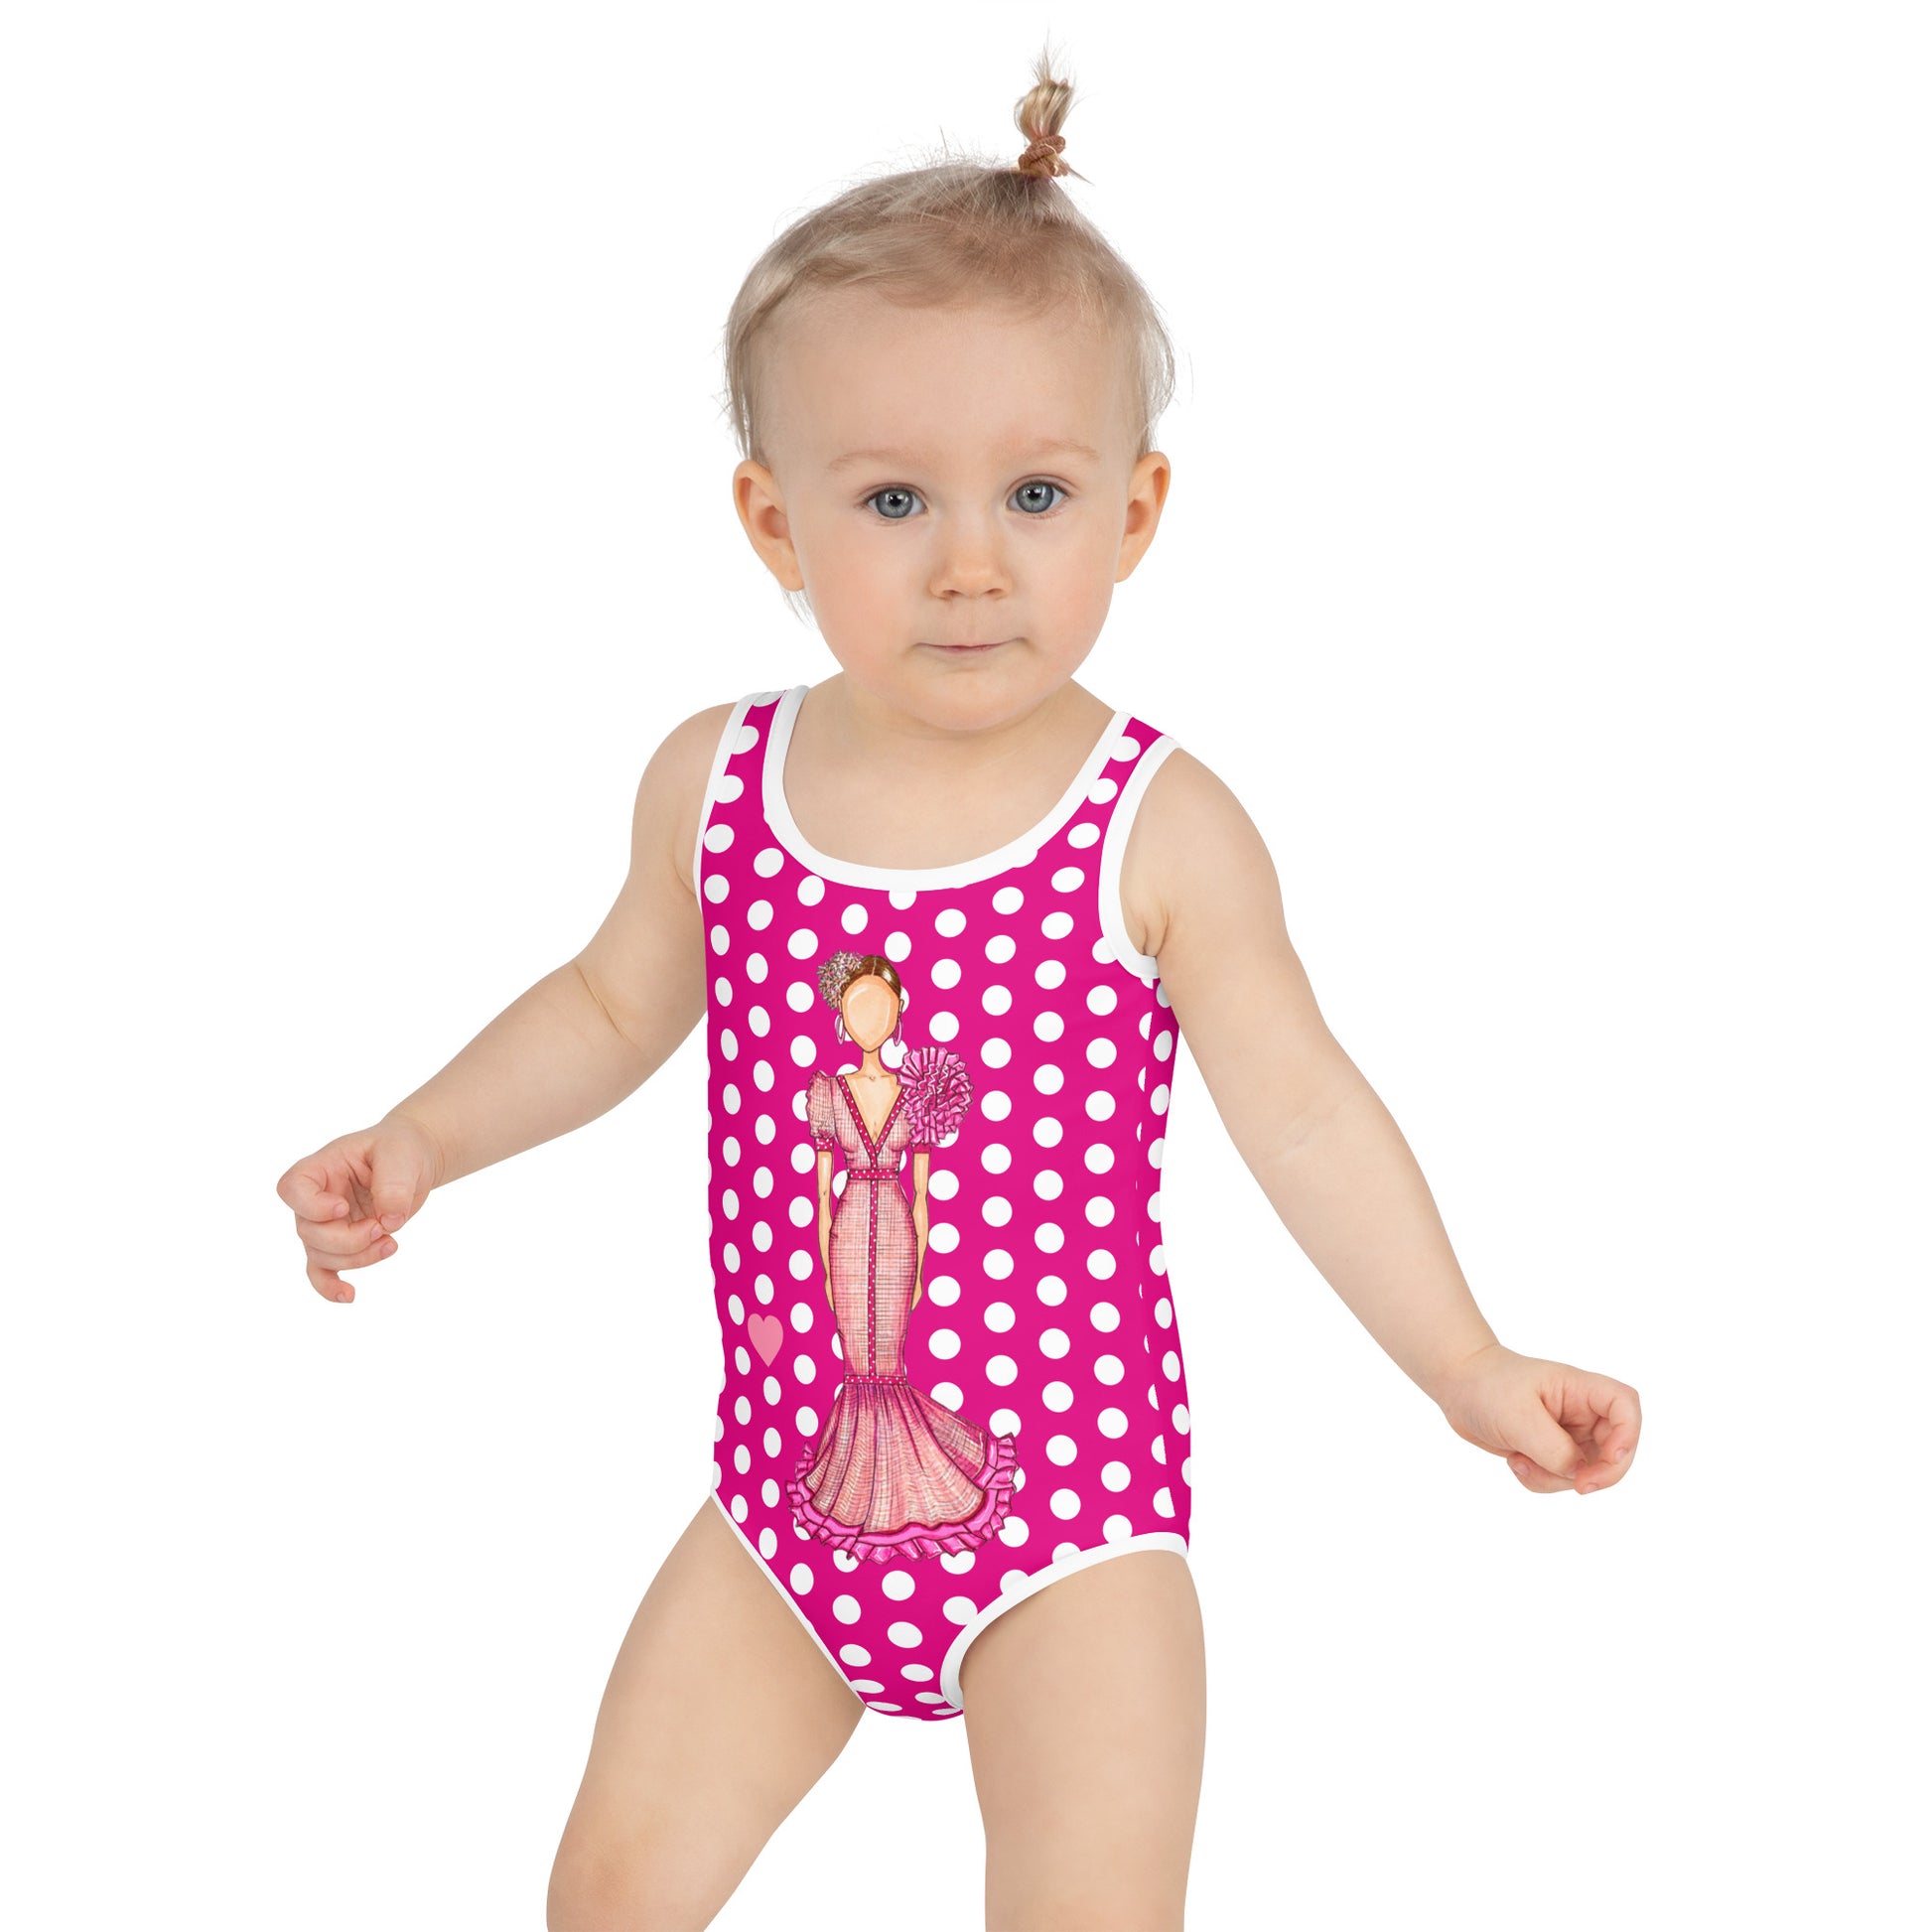 a baby girl wearing a pink and white polka dot swimsuit